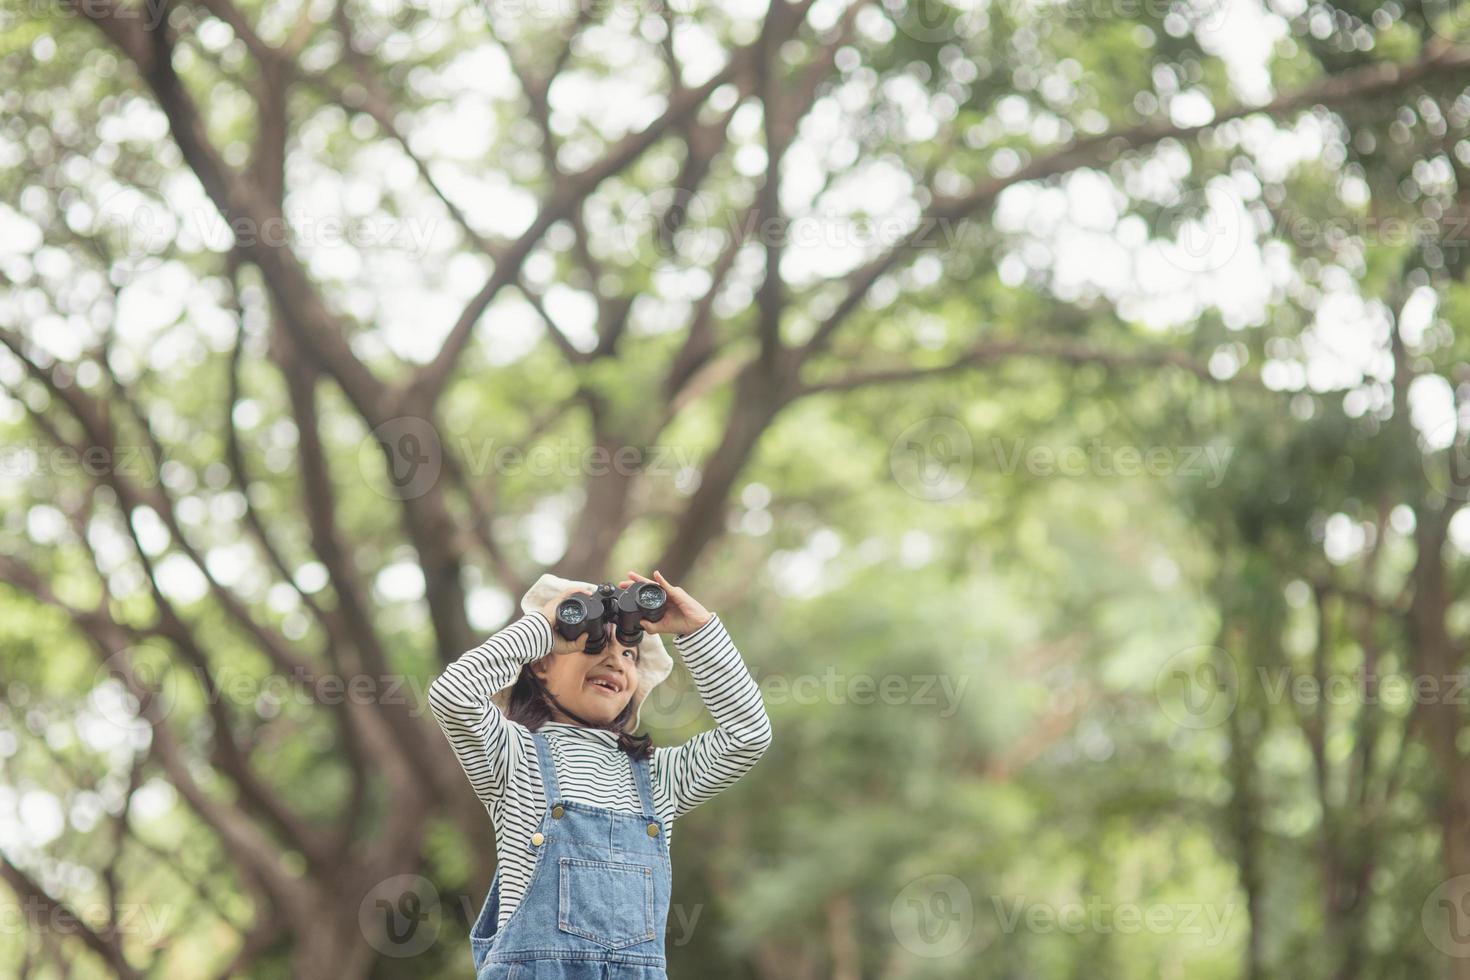 Happy kid looking ahead. Smiling child with the binoculars. Travel and adventure concept. Freedom, vacation photo